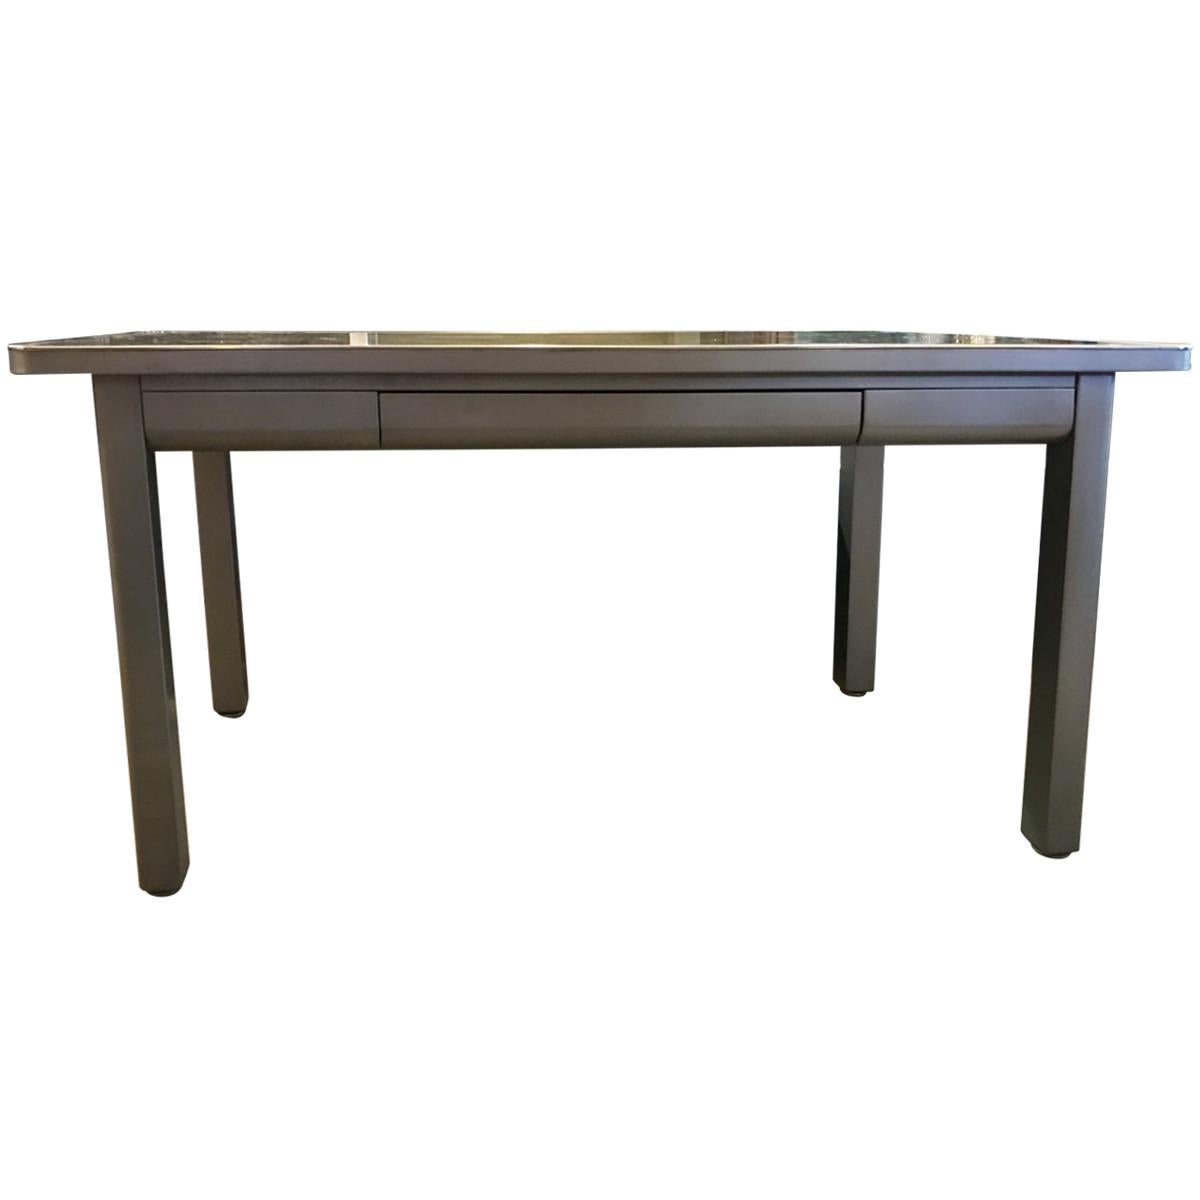 Industrial interior design showcases neutral tones, utilitarian objects, and wood and metal surfaces, proudly displaying the building materials that many try to conceal. Sleek and sophisticated, this brushed steel writing desk features a